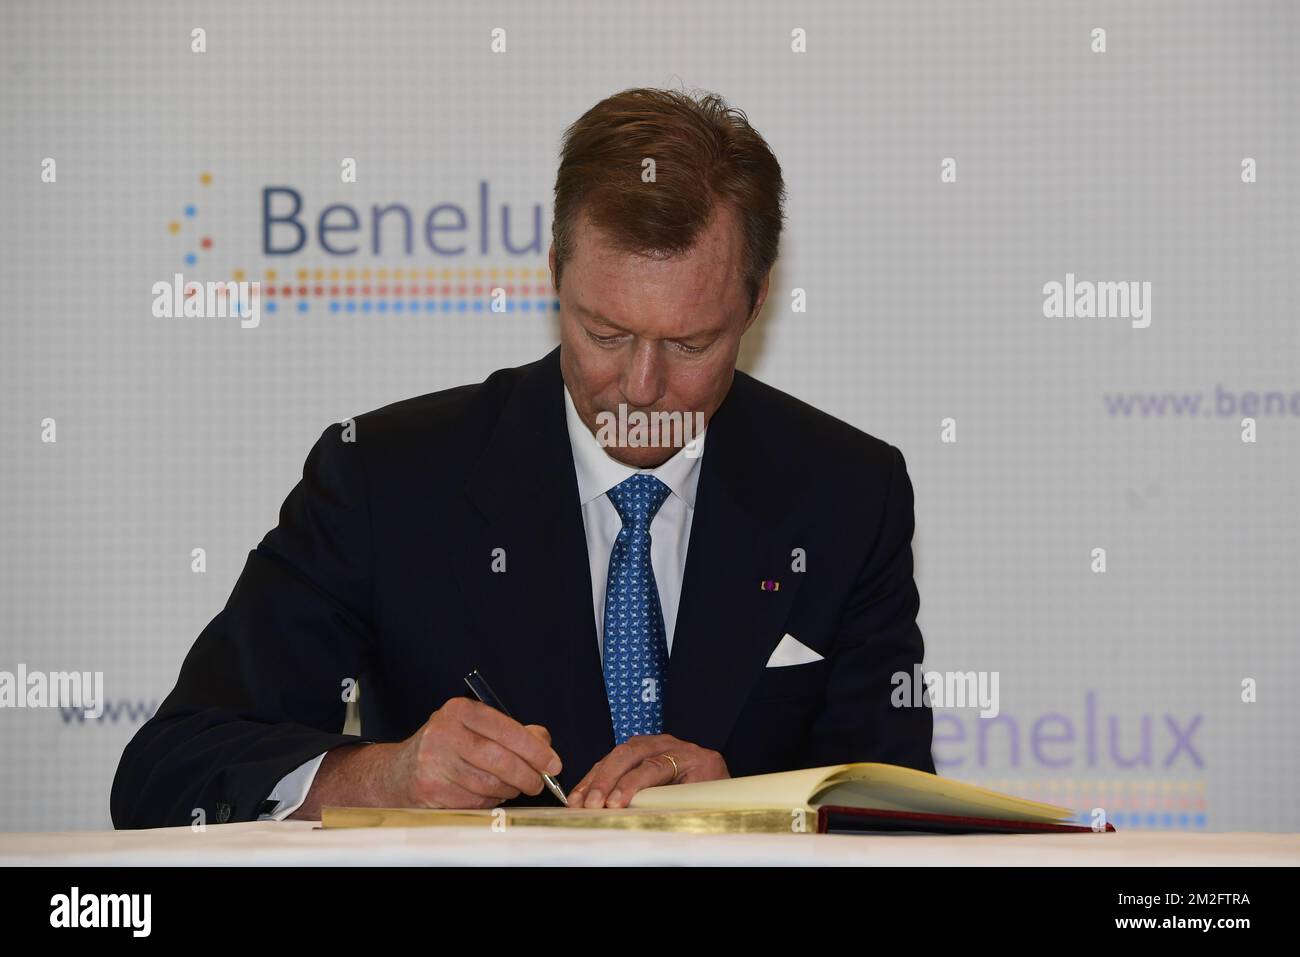 Grand Duke Henri of Luxembourg signs the golden book at a visit to the Benelux General Secretariat on the occasion of the 60th anniversary of the Benelux Union, Tuesday 05 June 2018, at the Royal Palace in Brussels. BELGA PHOTO LAURIE DIEFFEMBACQ  Stock Photo